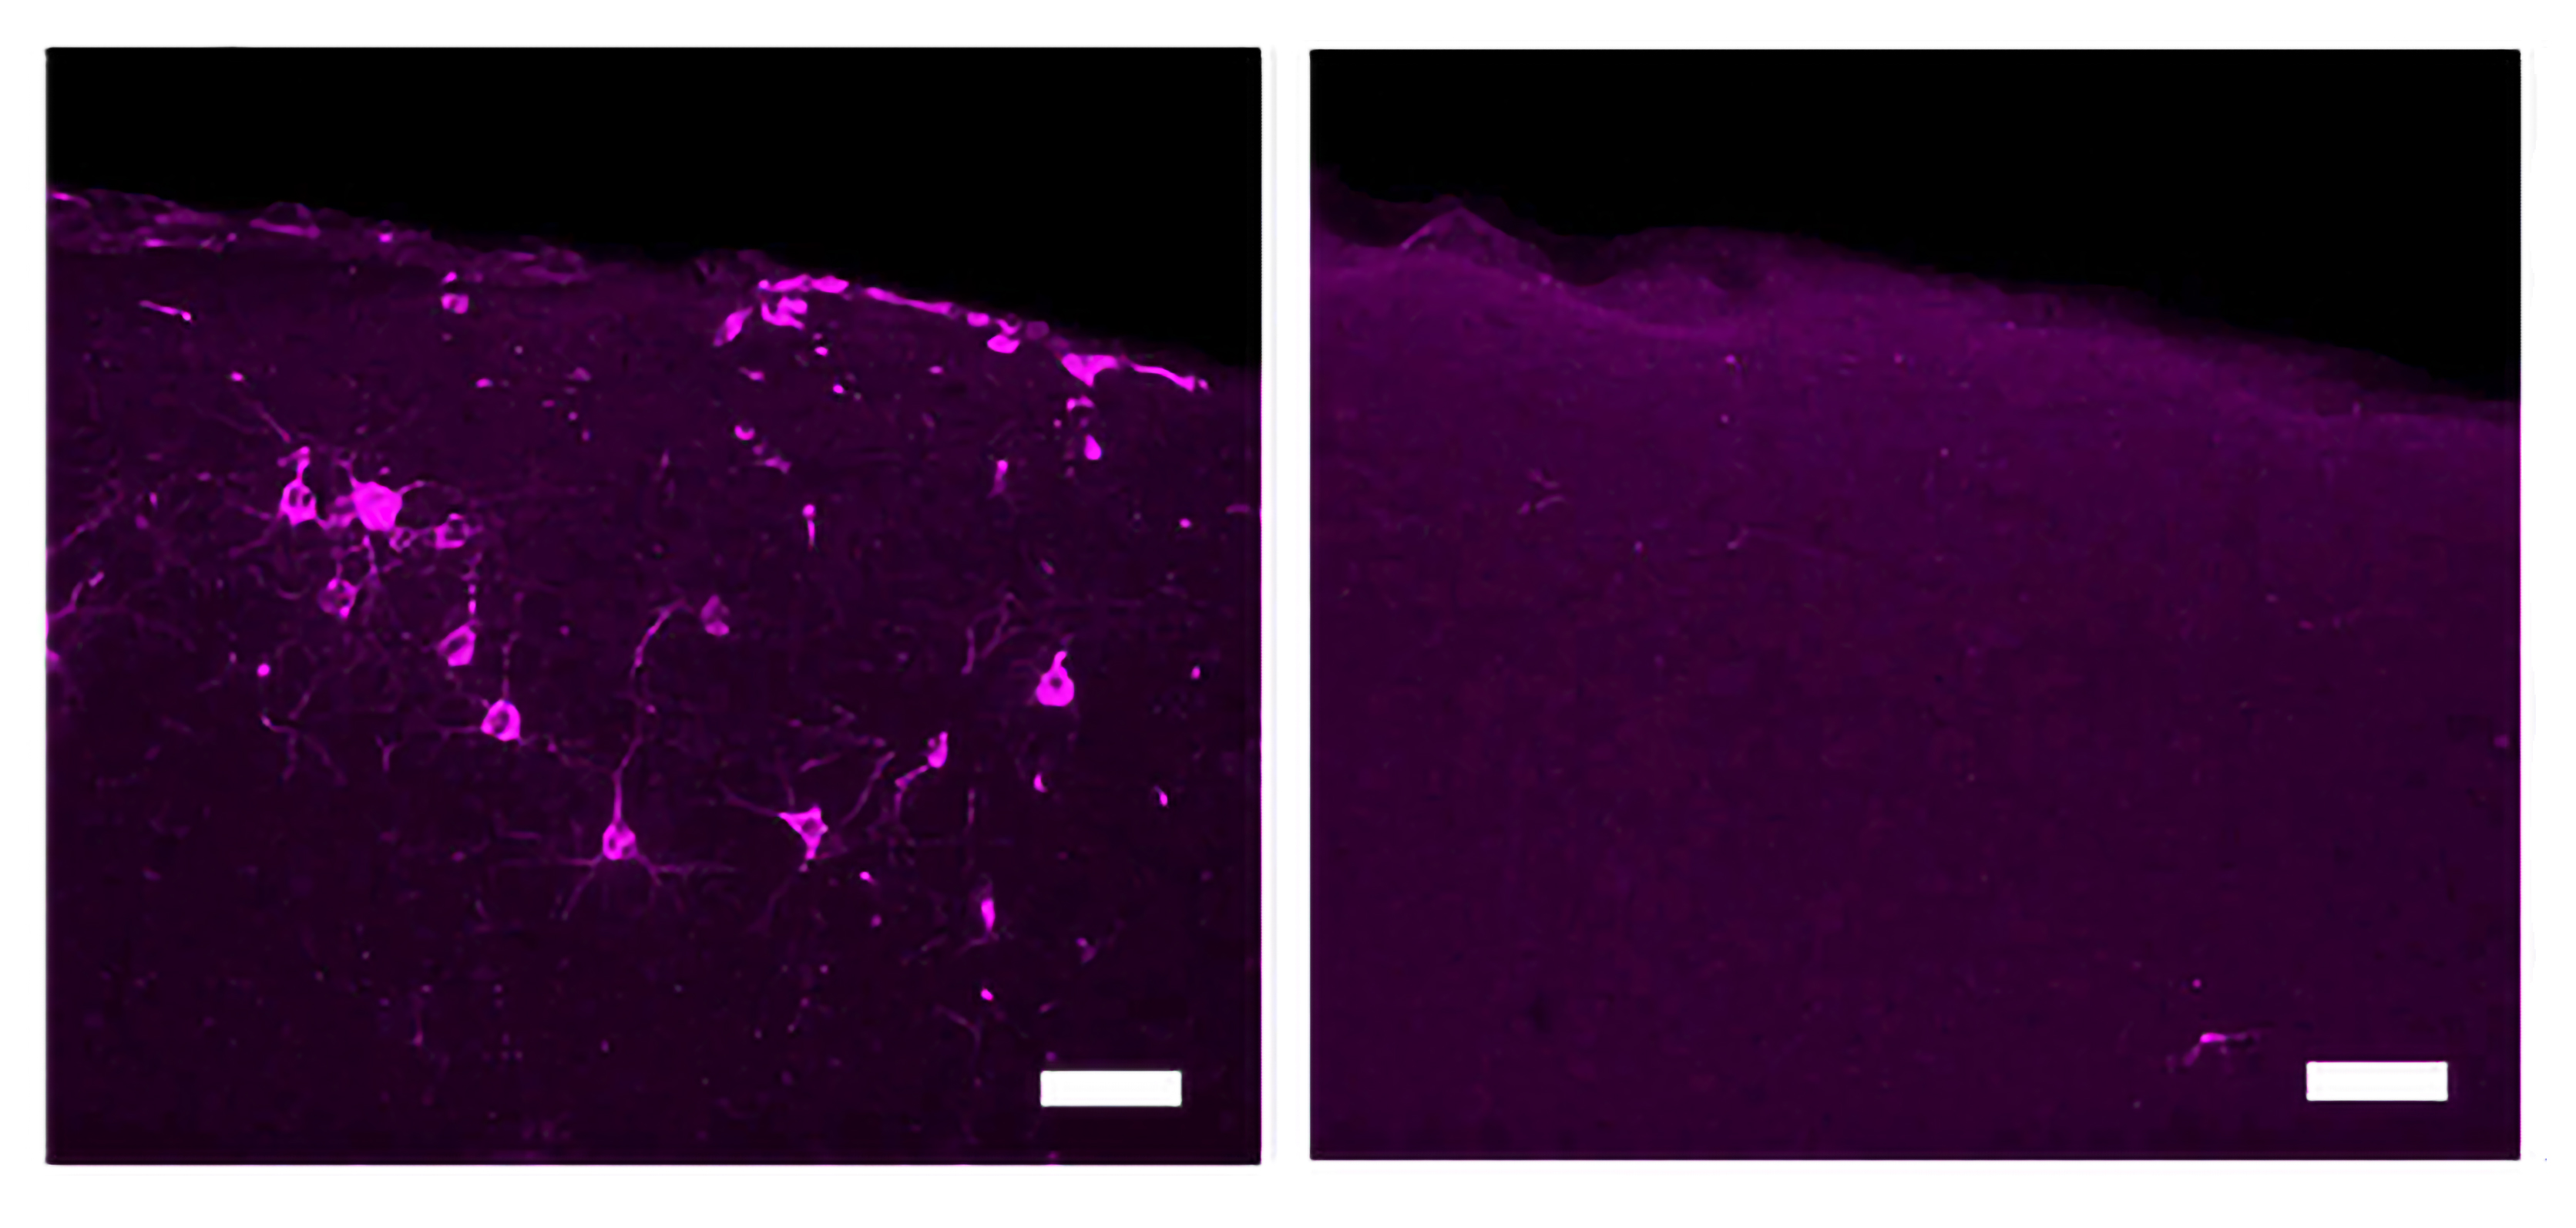 Two panels show cells with magenta staining on the left and a broader field of magenta with now specific cells visible on the right